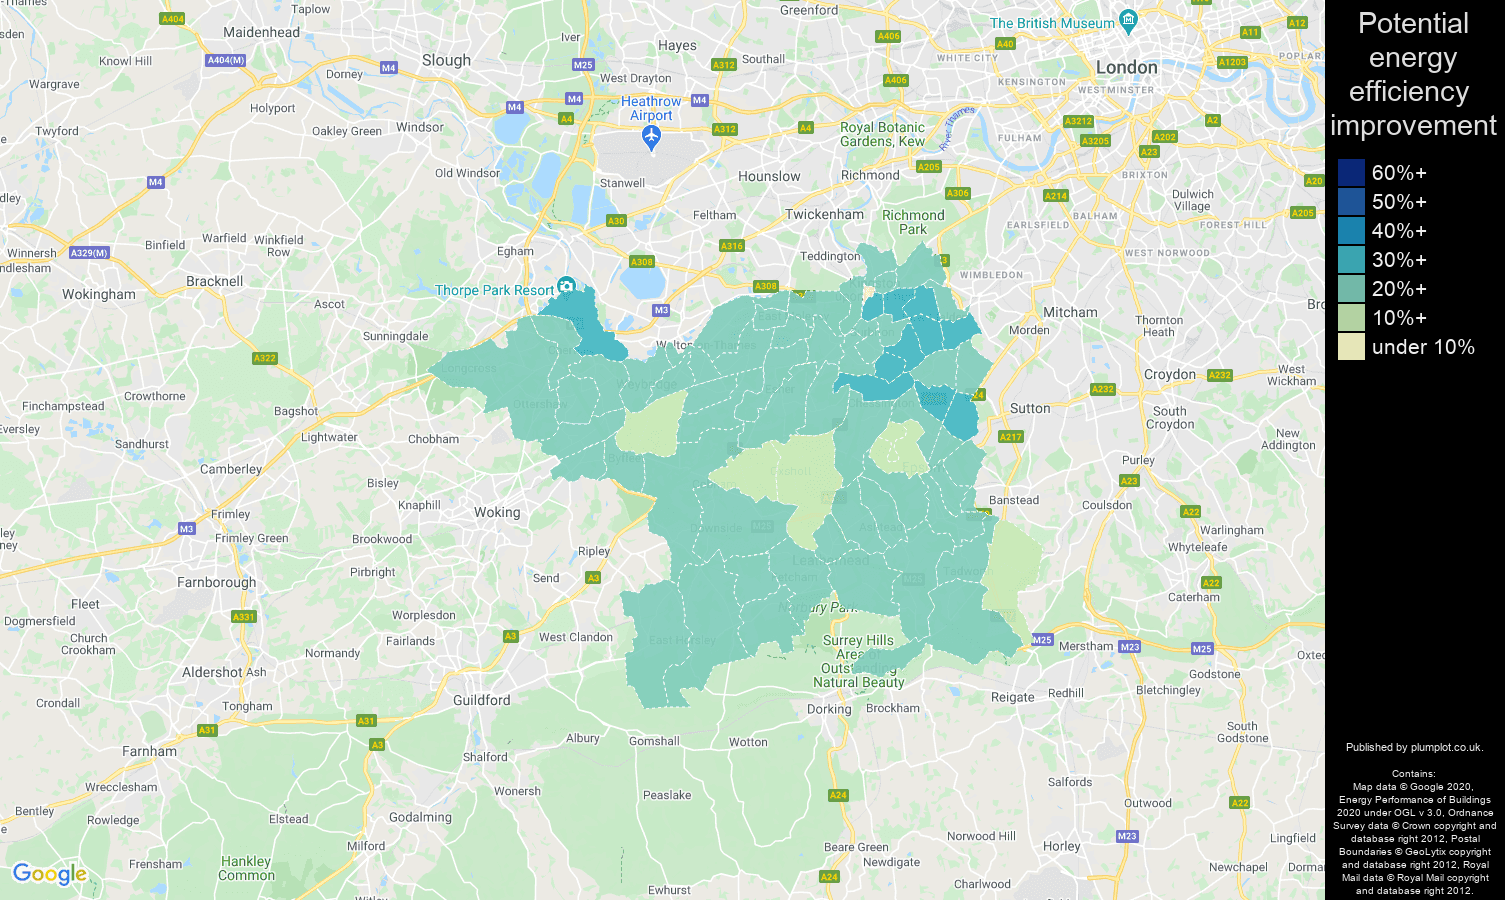 Kingston upon Thames map of potential energy efficiency improvement of houses